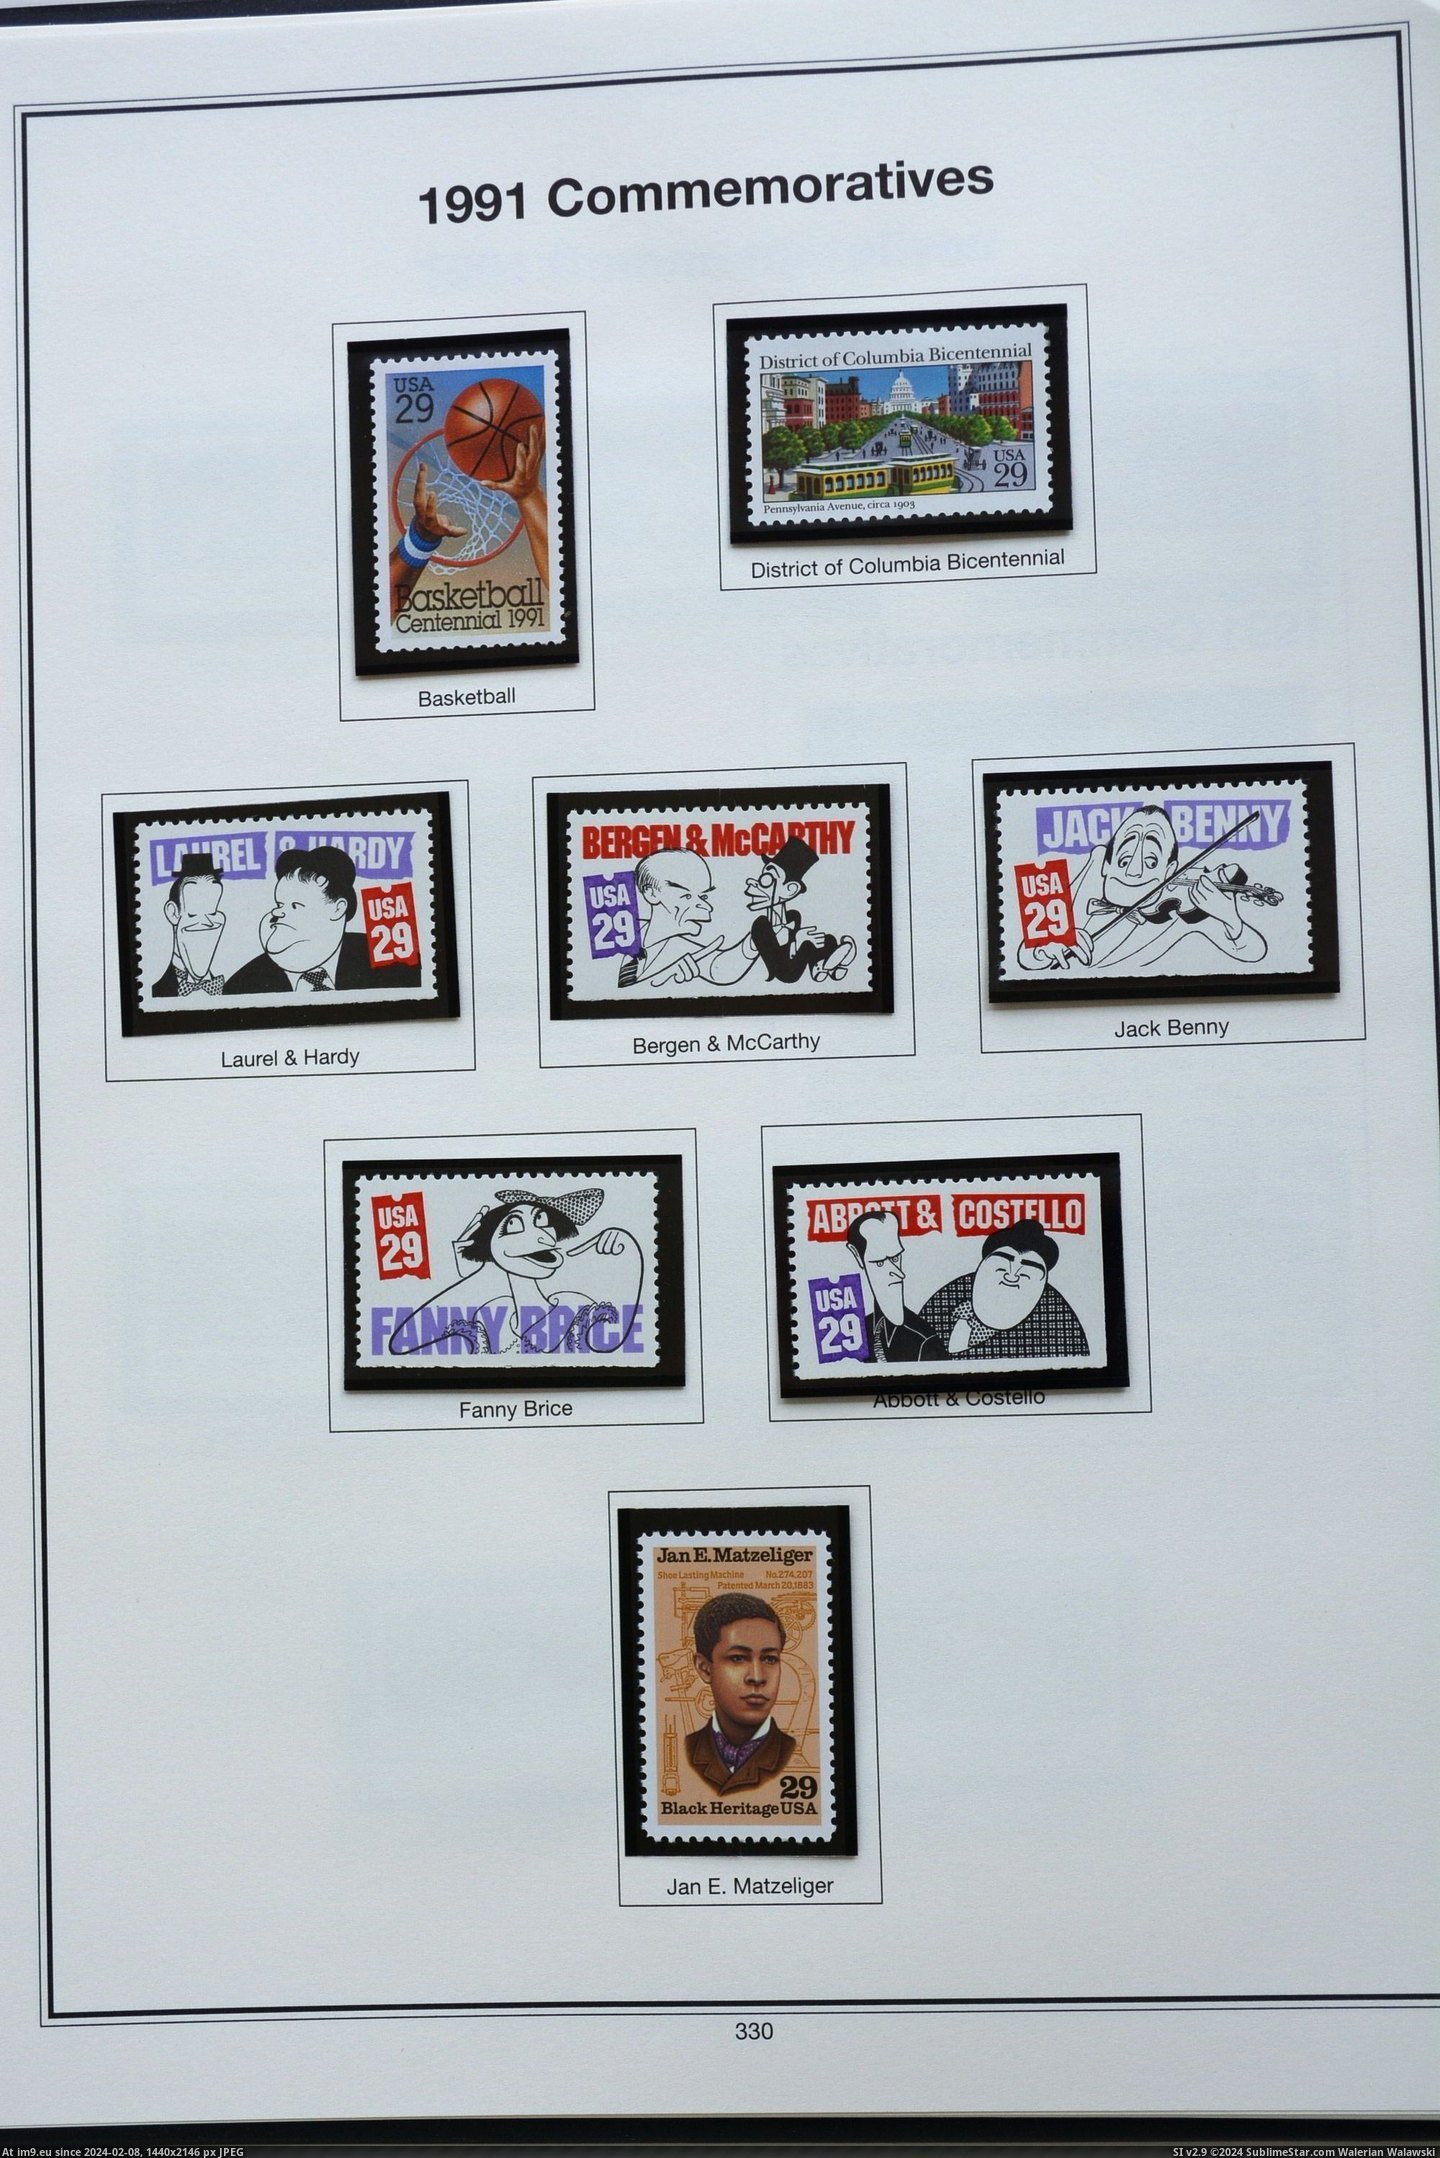 DSC_0899 (in Stamp Covers)